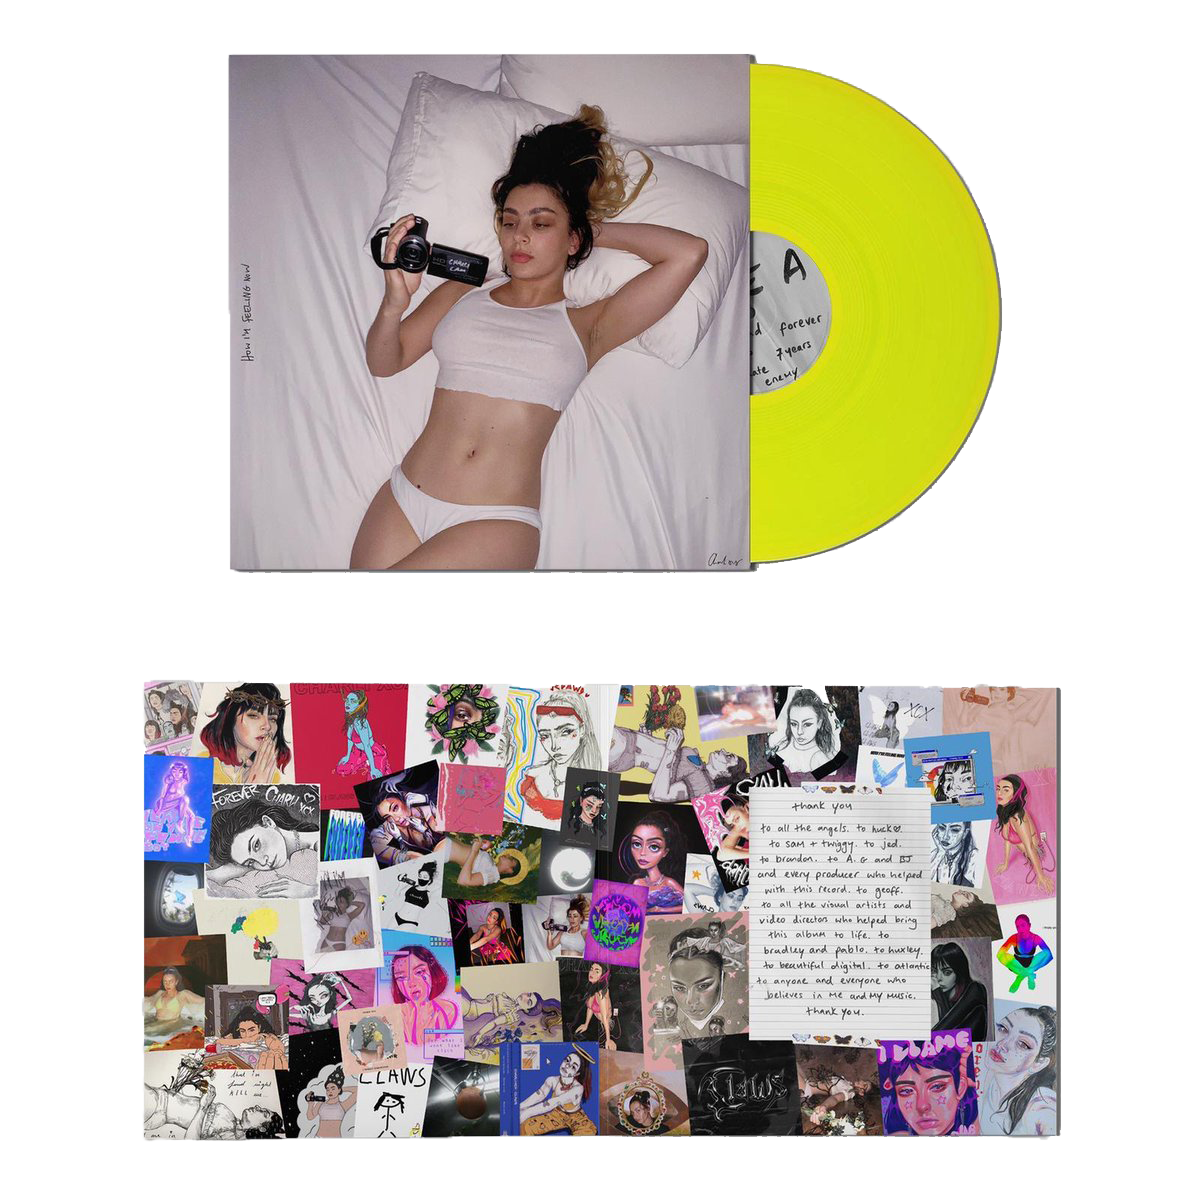 How I'm Feeling Now (Limited Edition 140g Neon Yellow Vinyl)